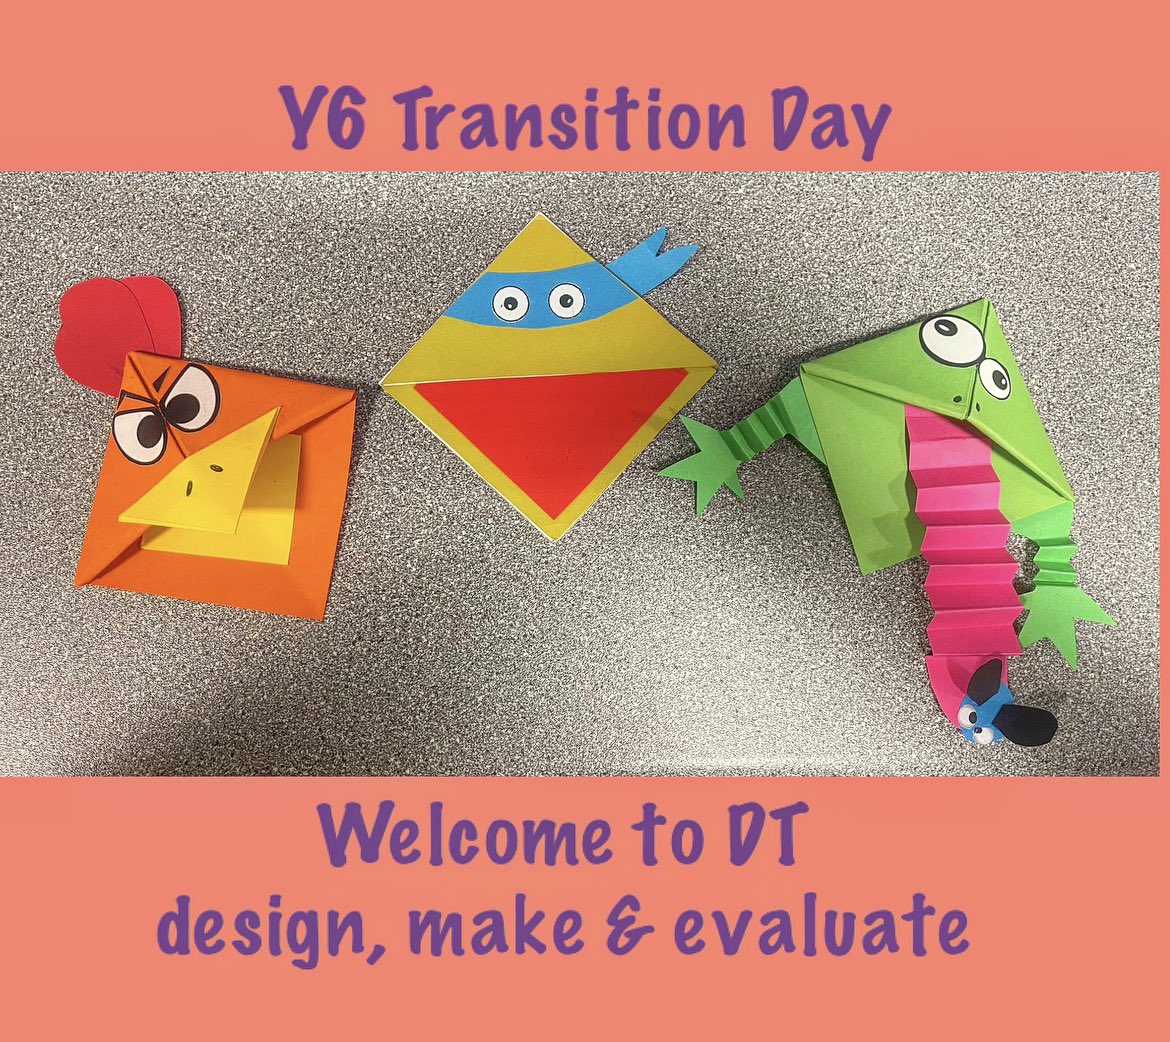 👋🏻Welcome to @Outwood_Valley Y6! 

We hope you enjoyed making your animal bookmarks today in DT. 
You all did fantastically well! ⭐️

Looking forward to seeing you in September 💜 

#transitionday #y6 #y7 #school #secondaryschool #OAV #september #DT #bookmark #bookworm